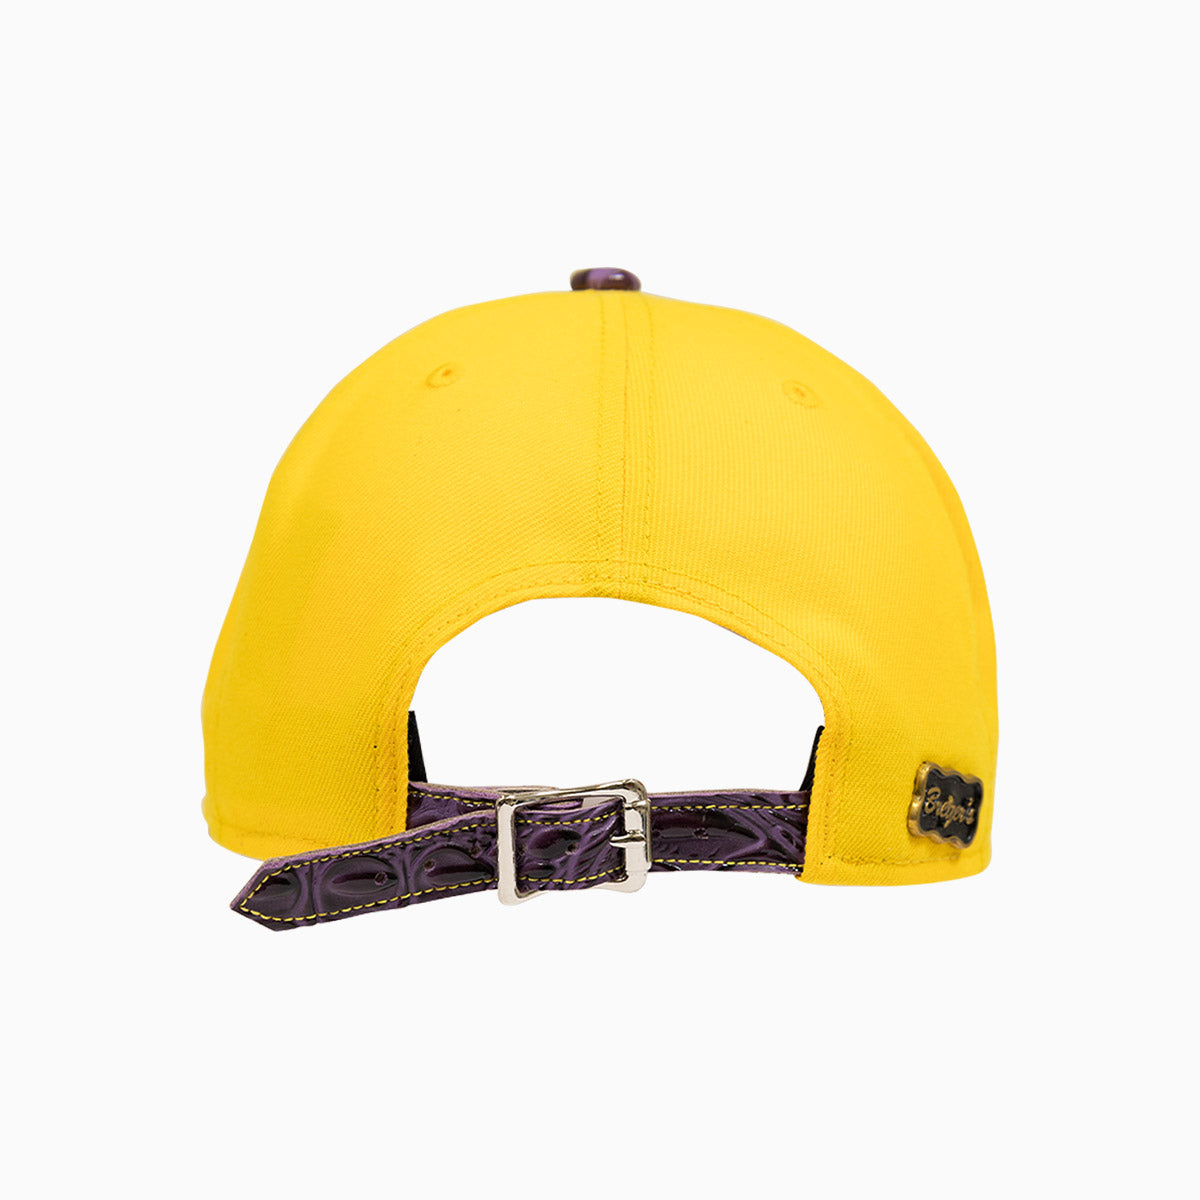 breyers-buck-50-los-angeles-lakers-hat-with-leather-visor-breyers-tlalh-yelw-pul